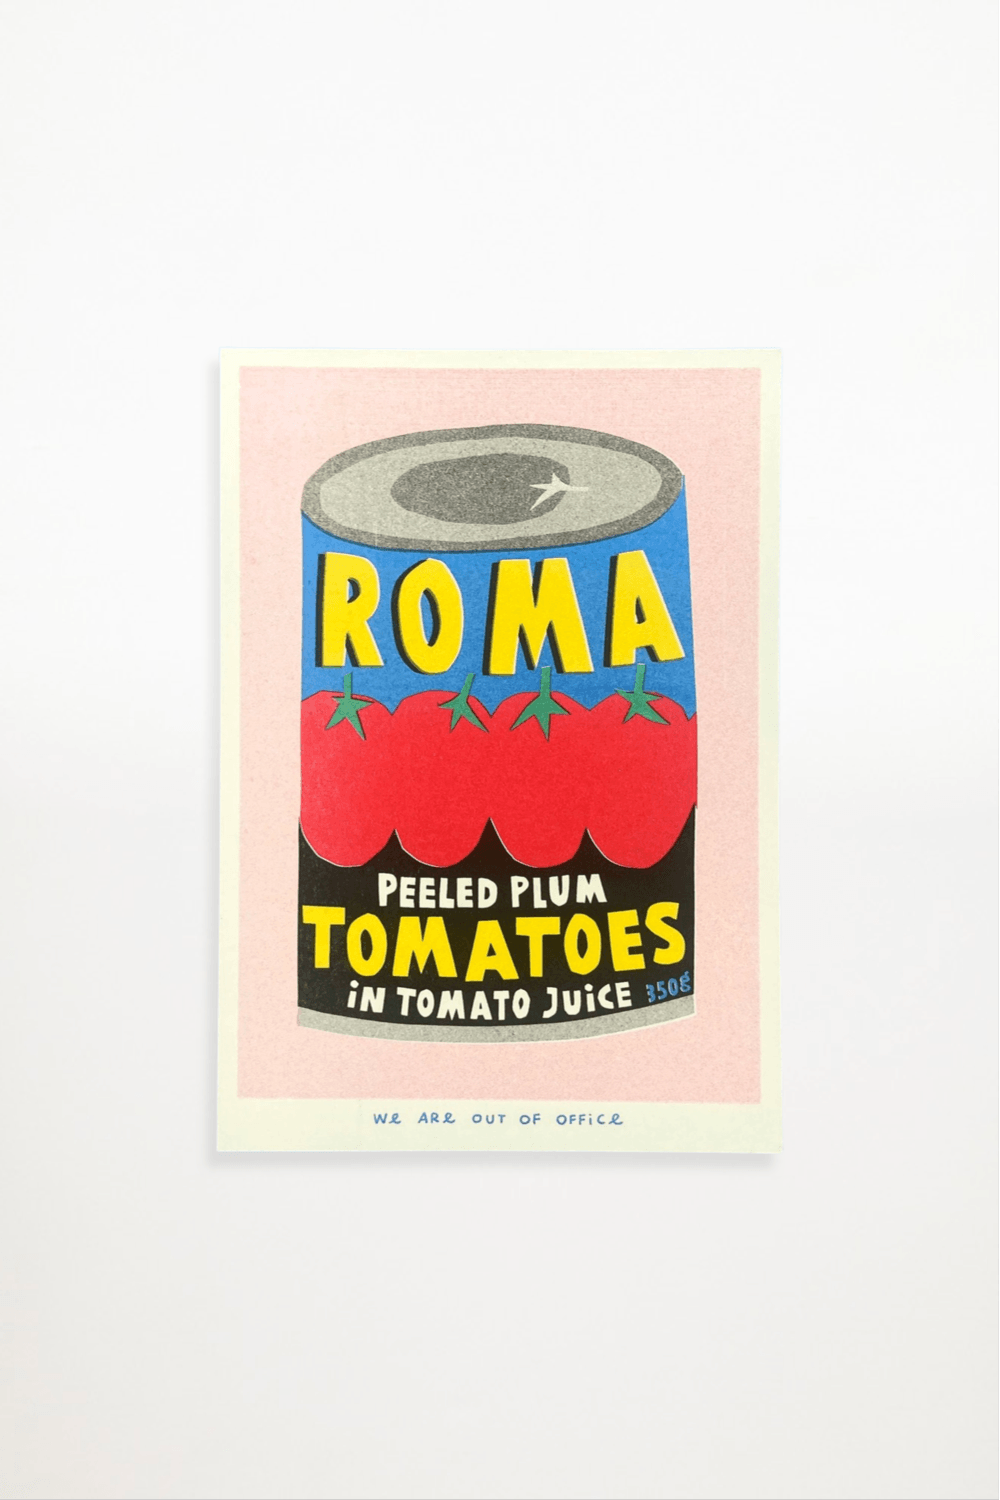 We are out of office - A risograph print of a can of Roma plum Tomatoes - Ensemble Studios